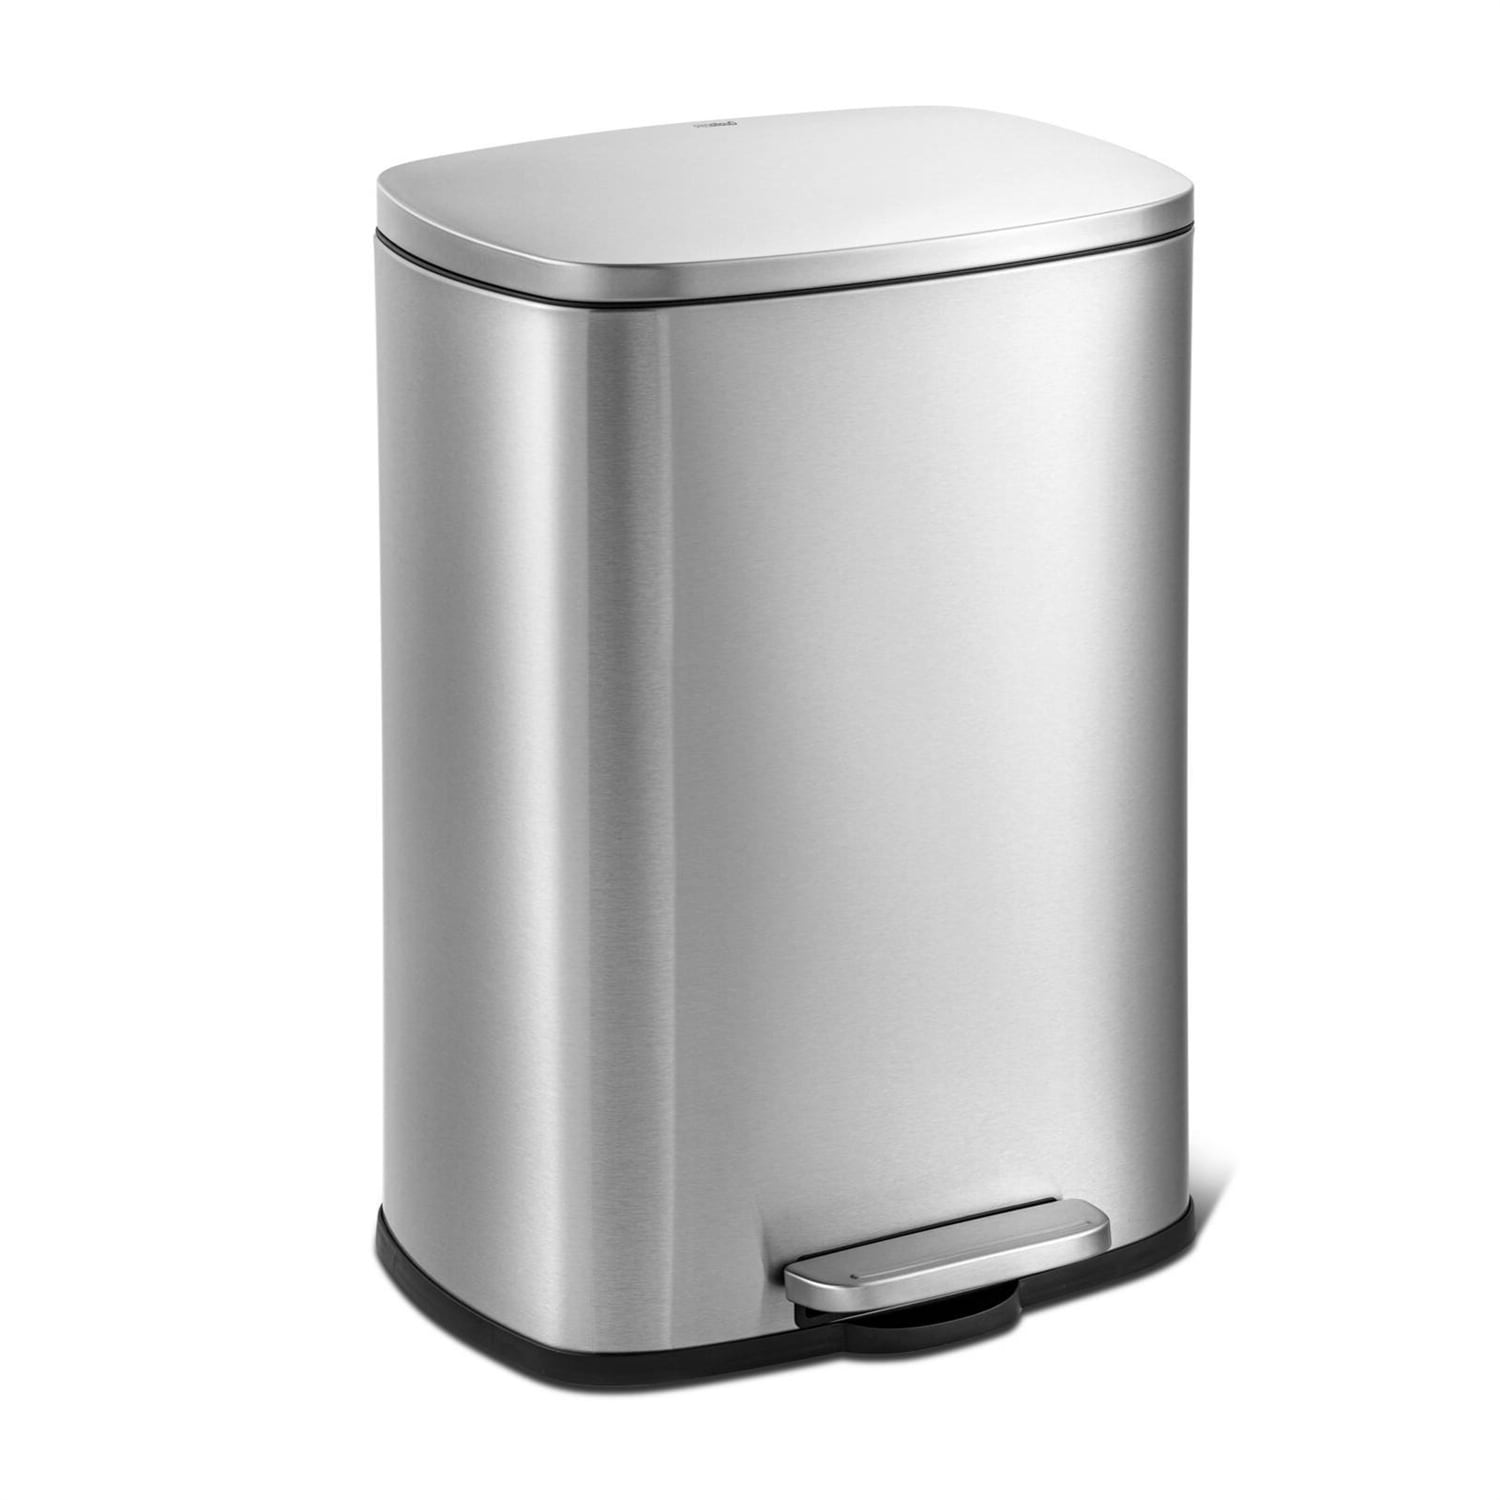 https://ak1.ostkcdn.com/images/products/is/images/direct/306acd2fc30ba93077c4cb8ab53ab428a8d69d42/13-Gallon-Brushed-Stainless-Steel-Kitchen-Trash-Can-with-Step-Open-Lid.jpg